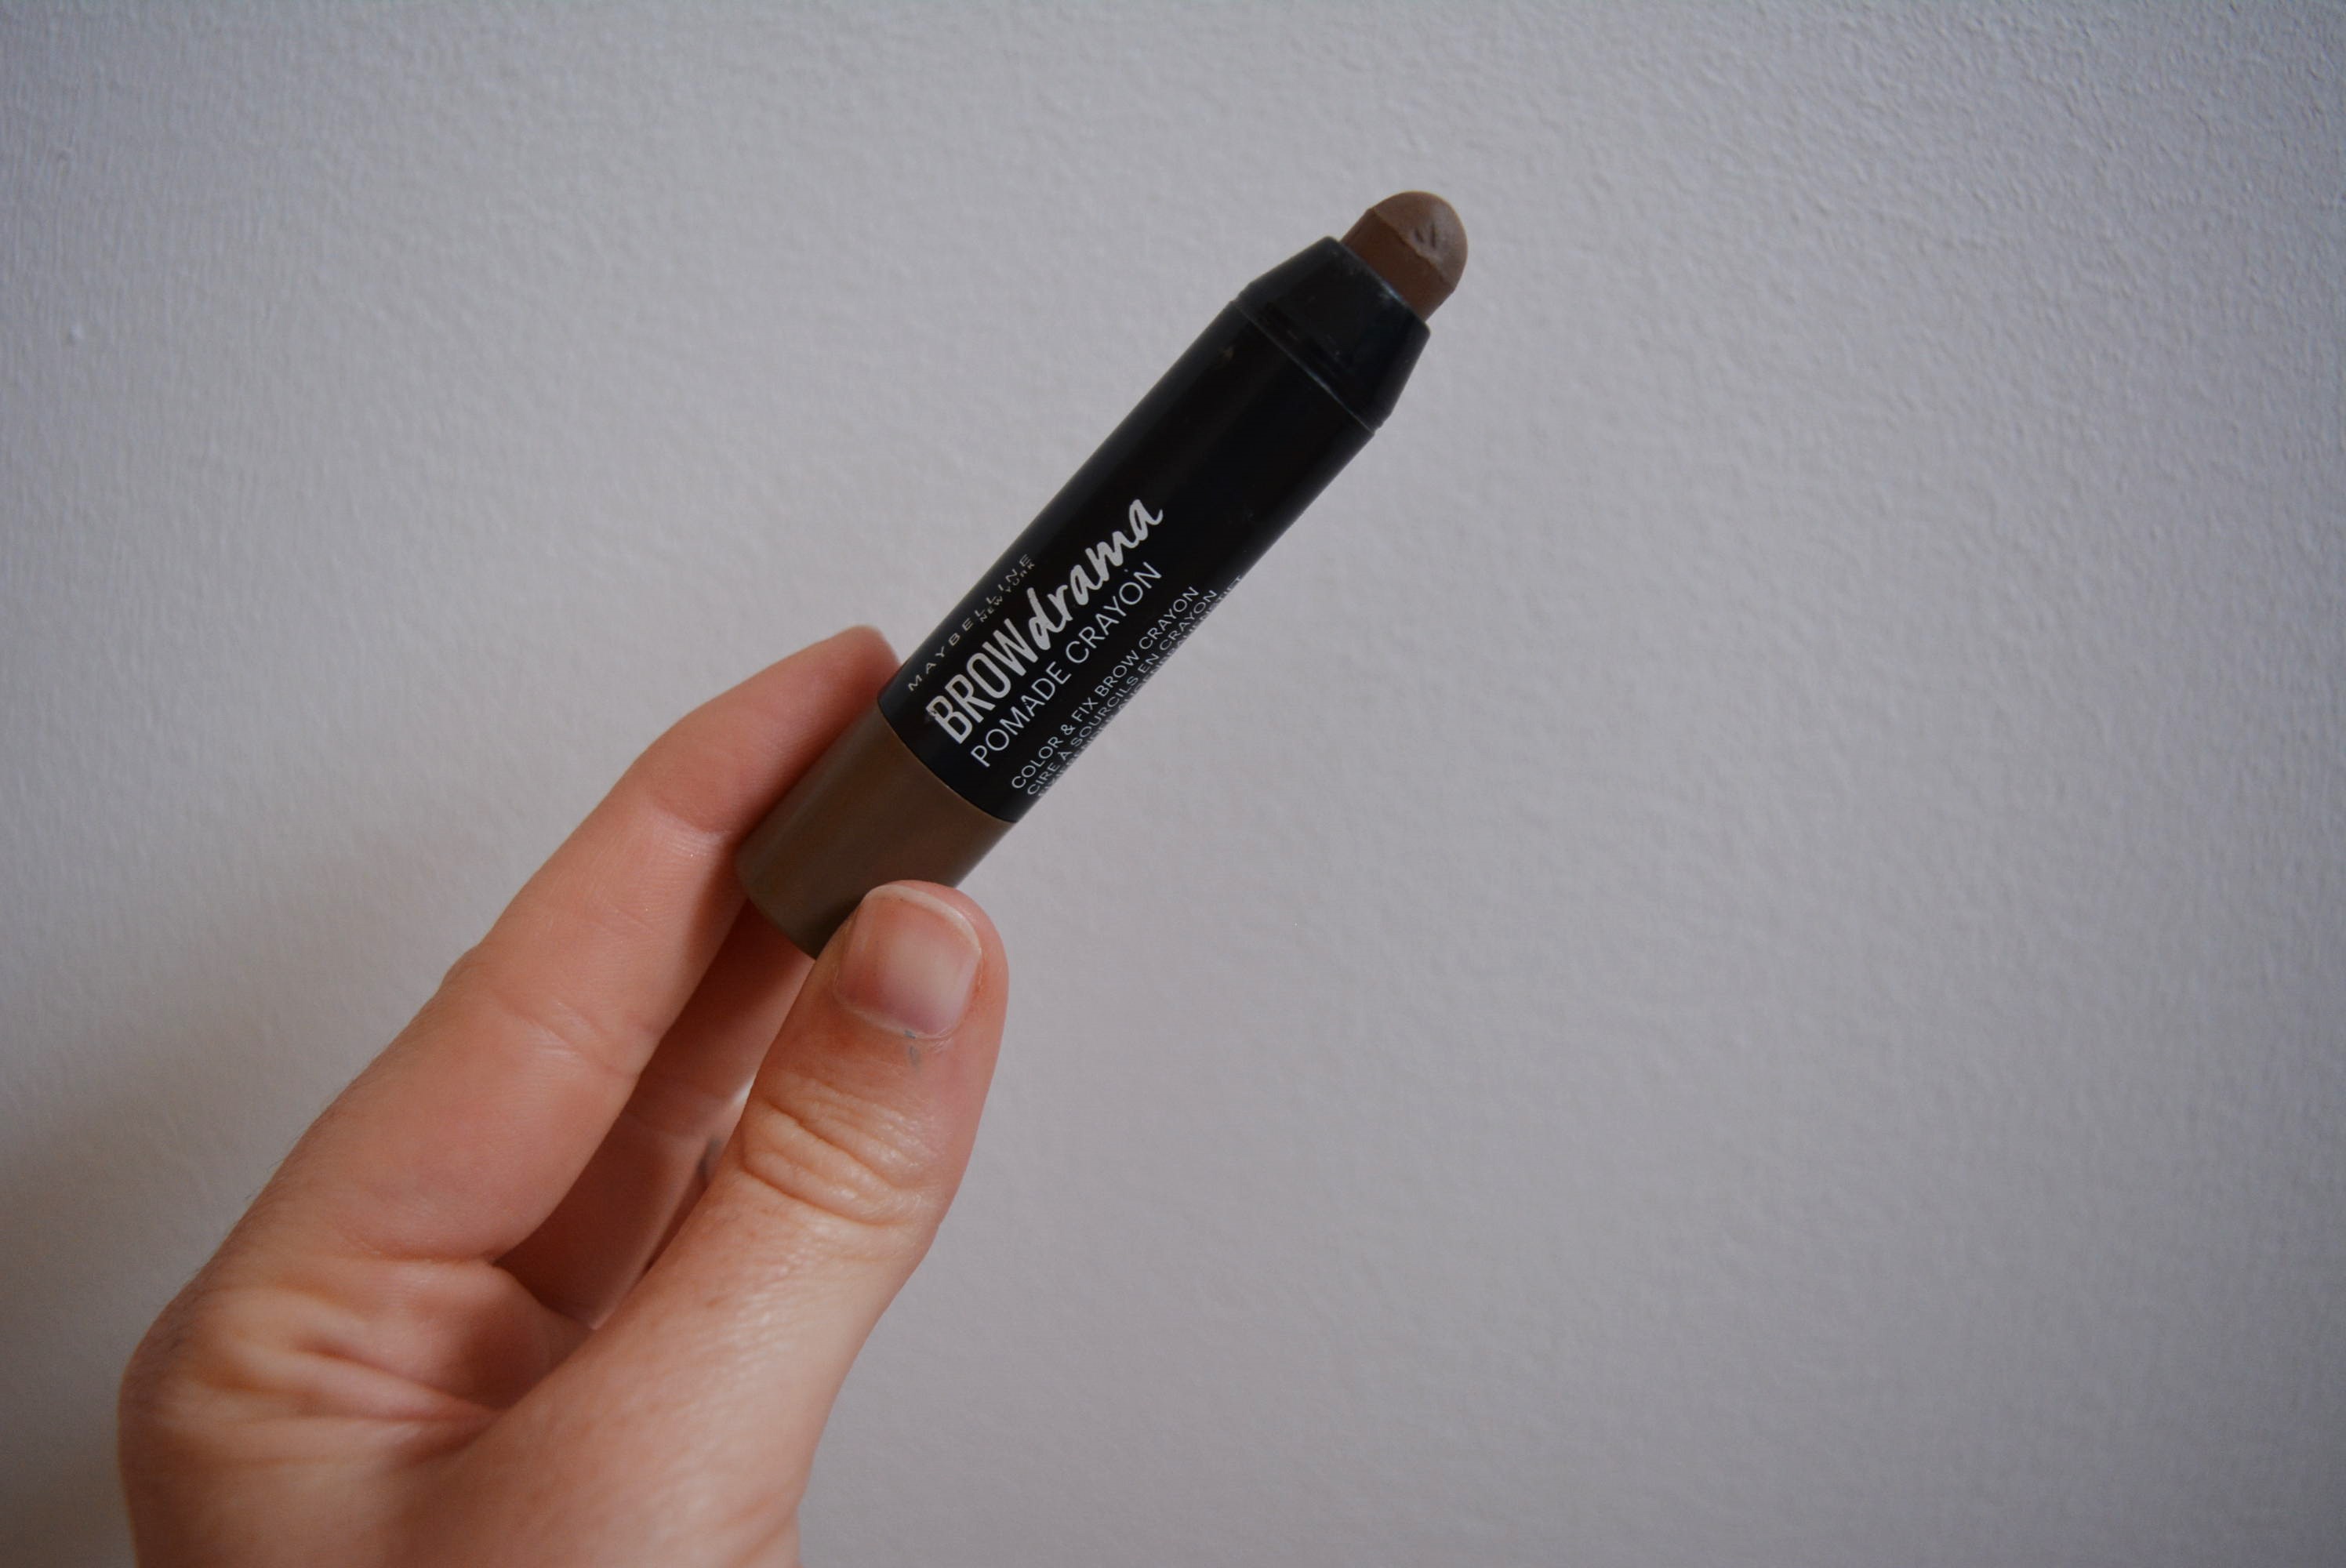 Maybelline Brow Drama Review 